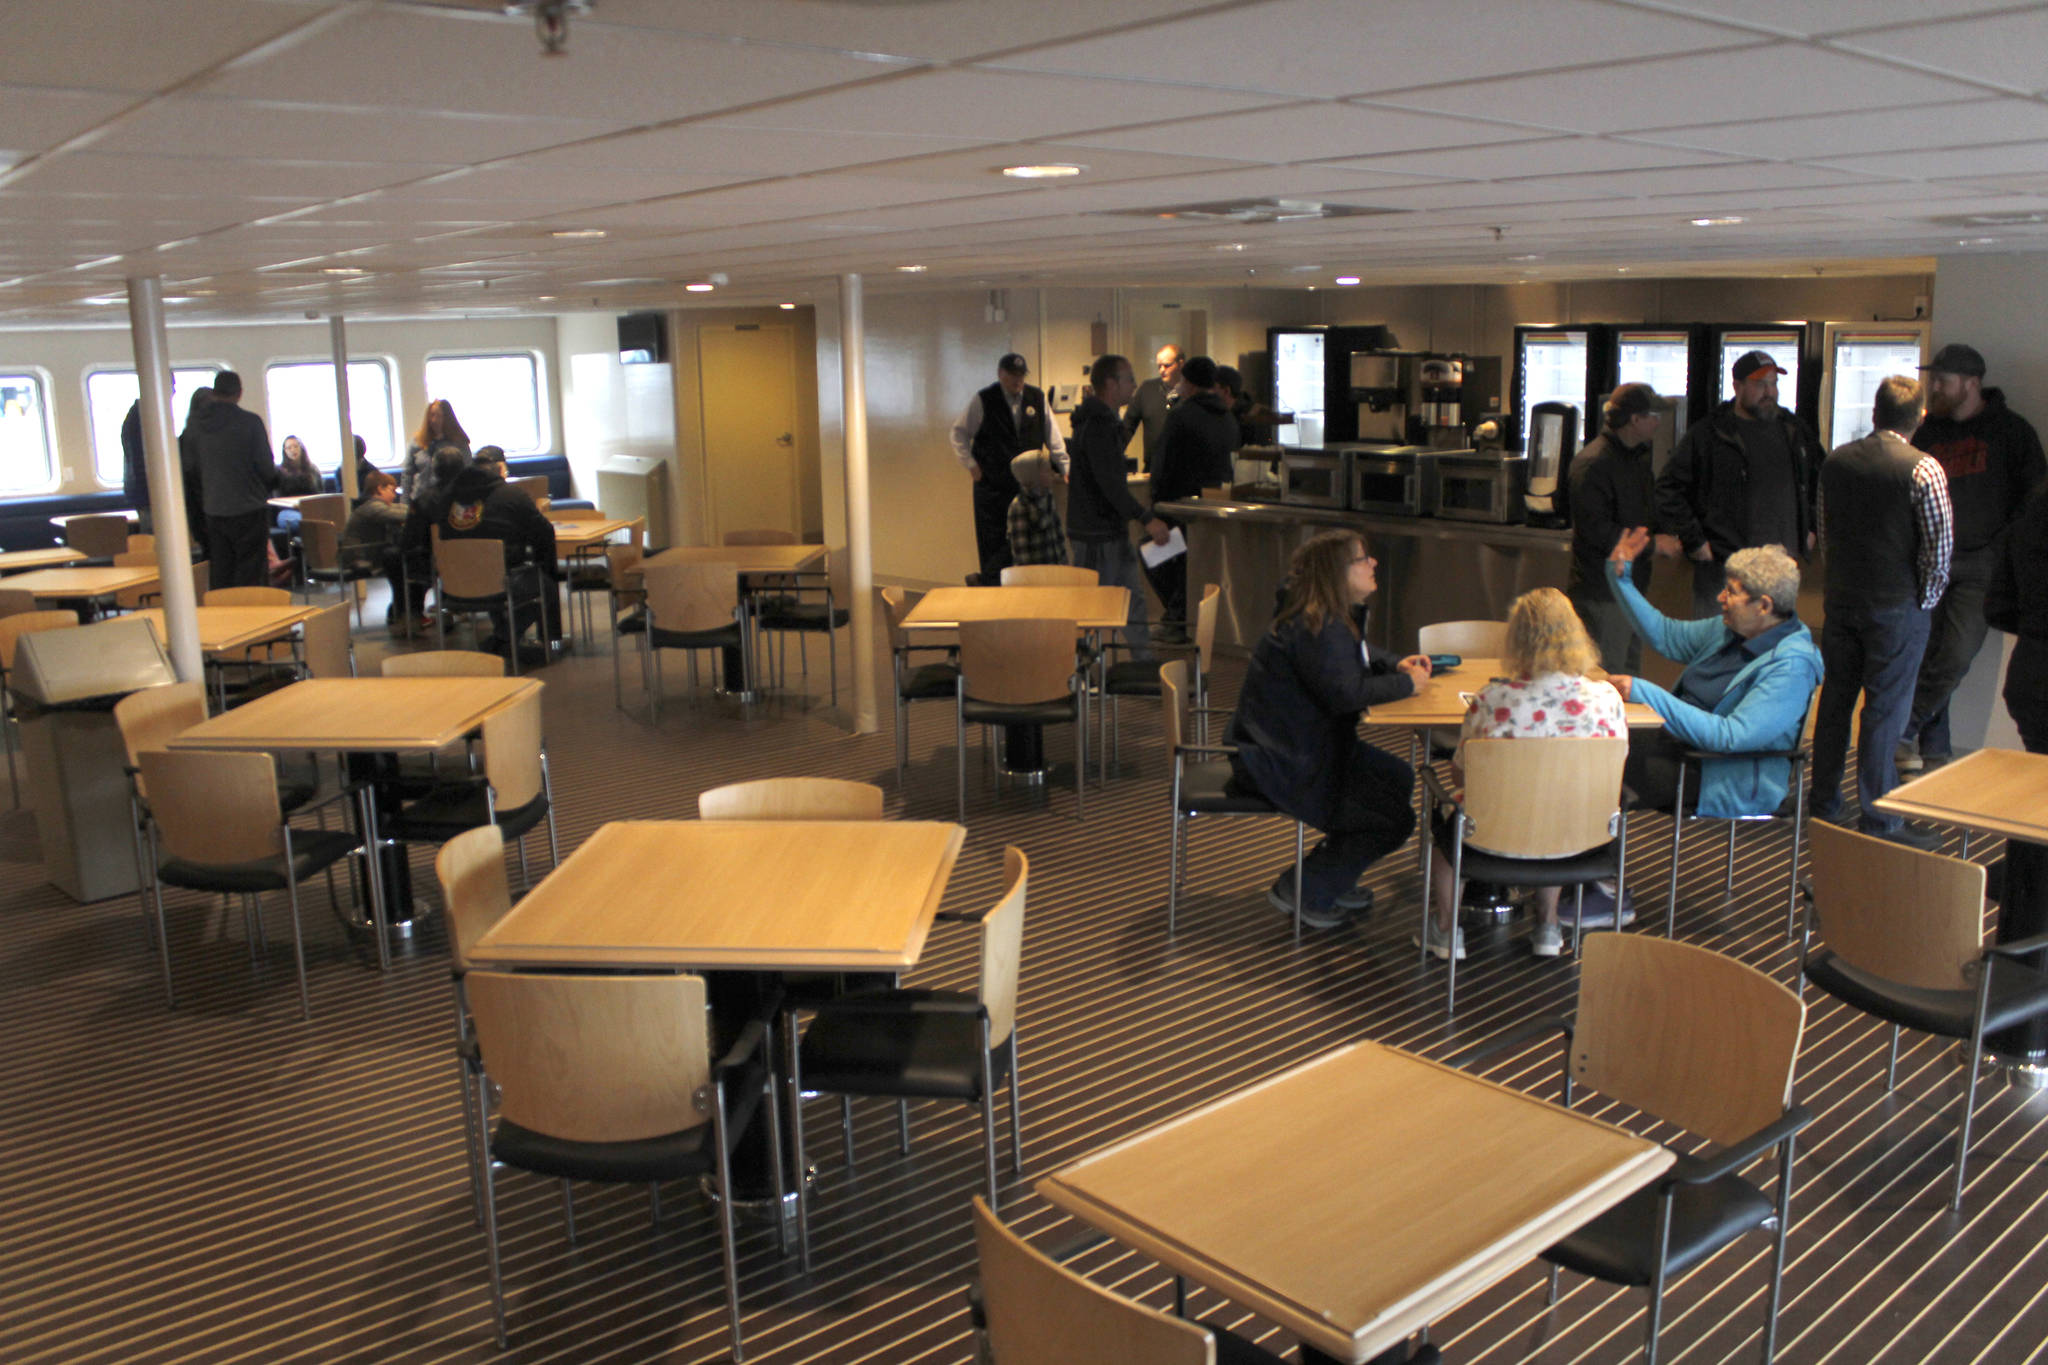 The dining hall of the ferry Tazlina is pictured on Sunday, May 5, 2019. (Alex McCarthy | Juneau Empire)